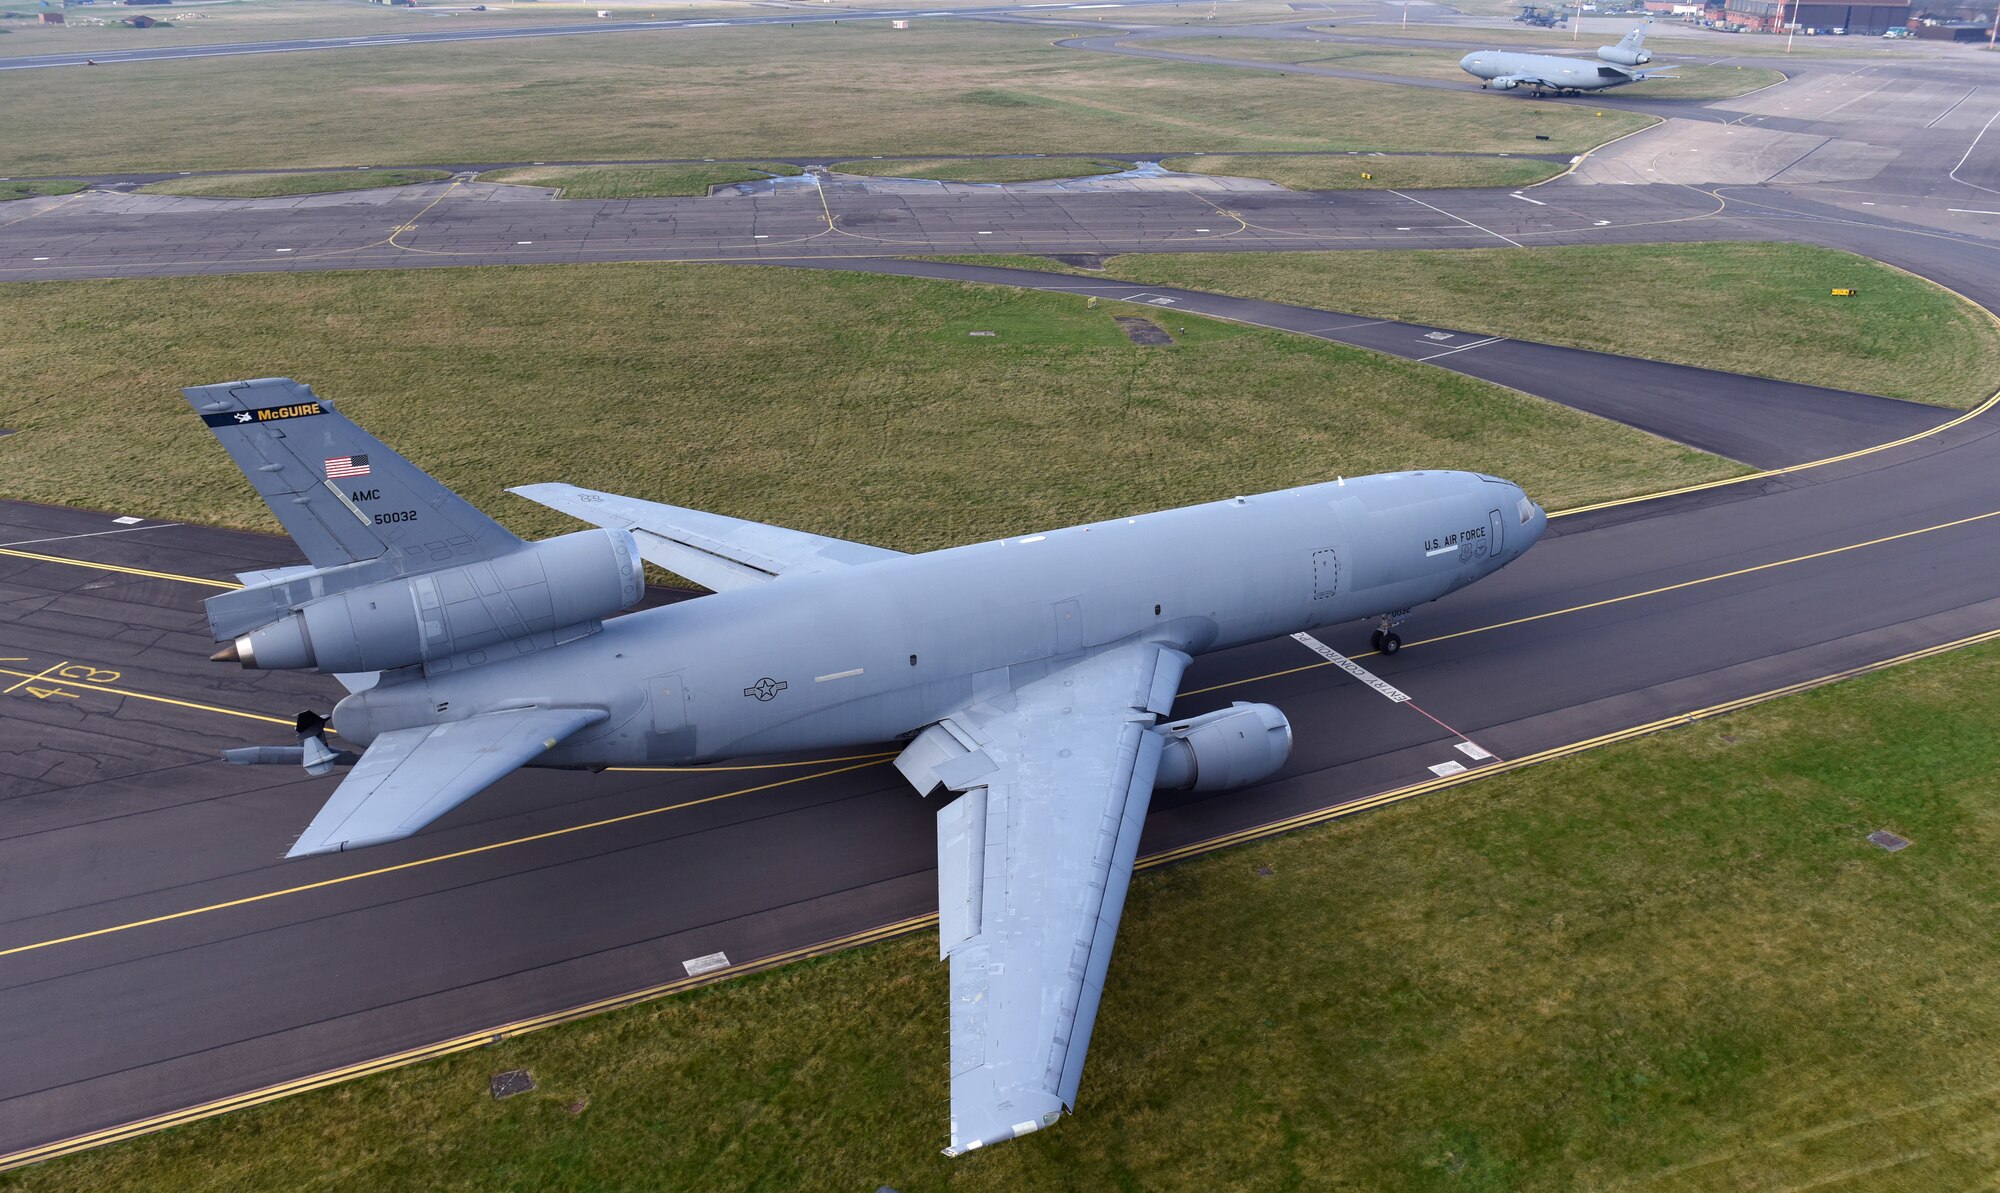 A U.S. Air Force KC-10 Extender aircraft assigned to the 305th Air Mobility Wing, Joint Base McGuire-Dix-Lakehurst, N.J., taxis towards the runway at Royal Air Force Mildenhall, England, March 10, 2022. The KC-10 is an Air Mobility Command advanced tanker and cargo aircraft designed to provide increased global mobility for U.S. Armed Forces. (U.S. Air Force photo by Karen Abeyasekere)